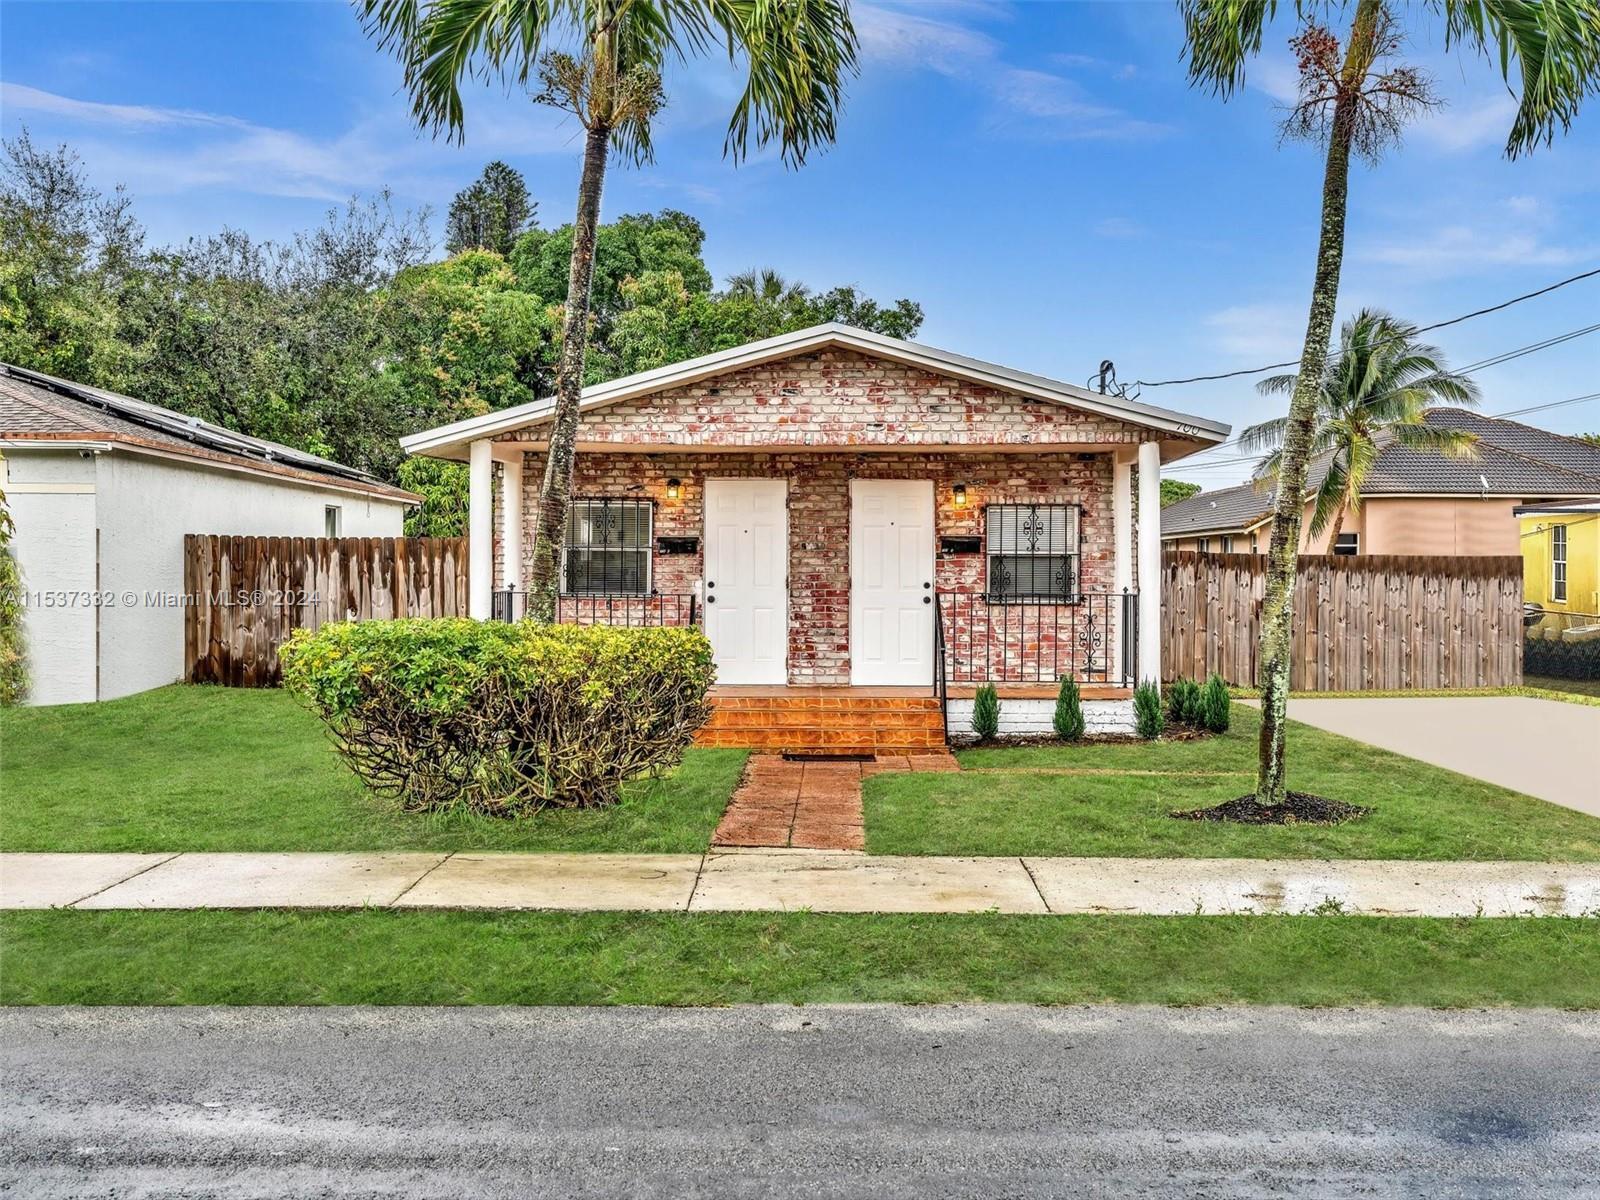 Priced for a quick sale, this tastefully remodeled Pompano Beach Duplex offers the perfect blend of 